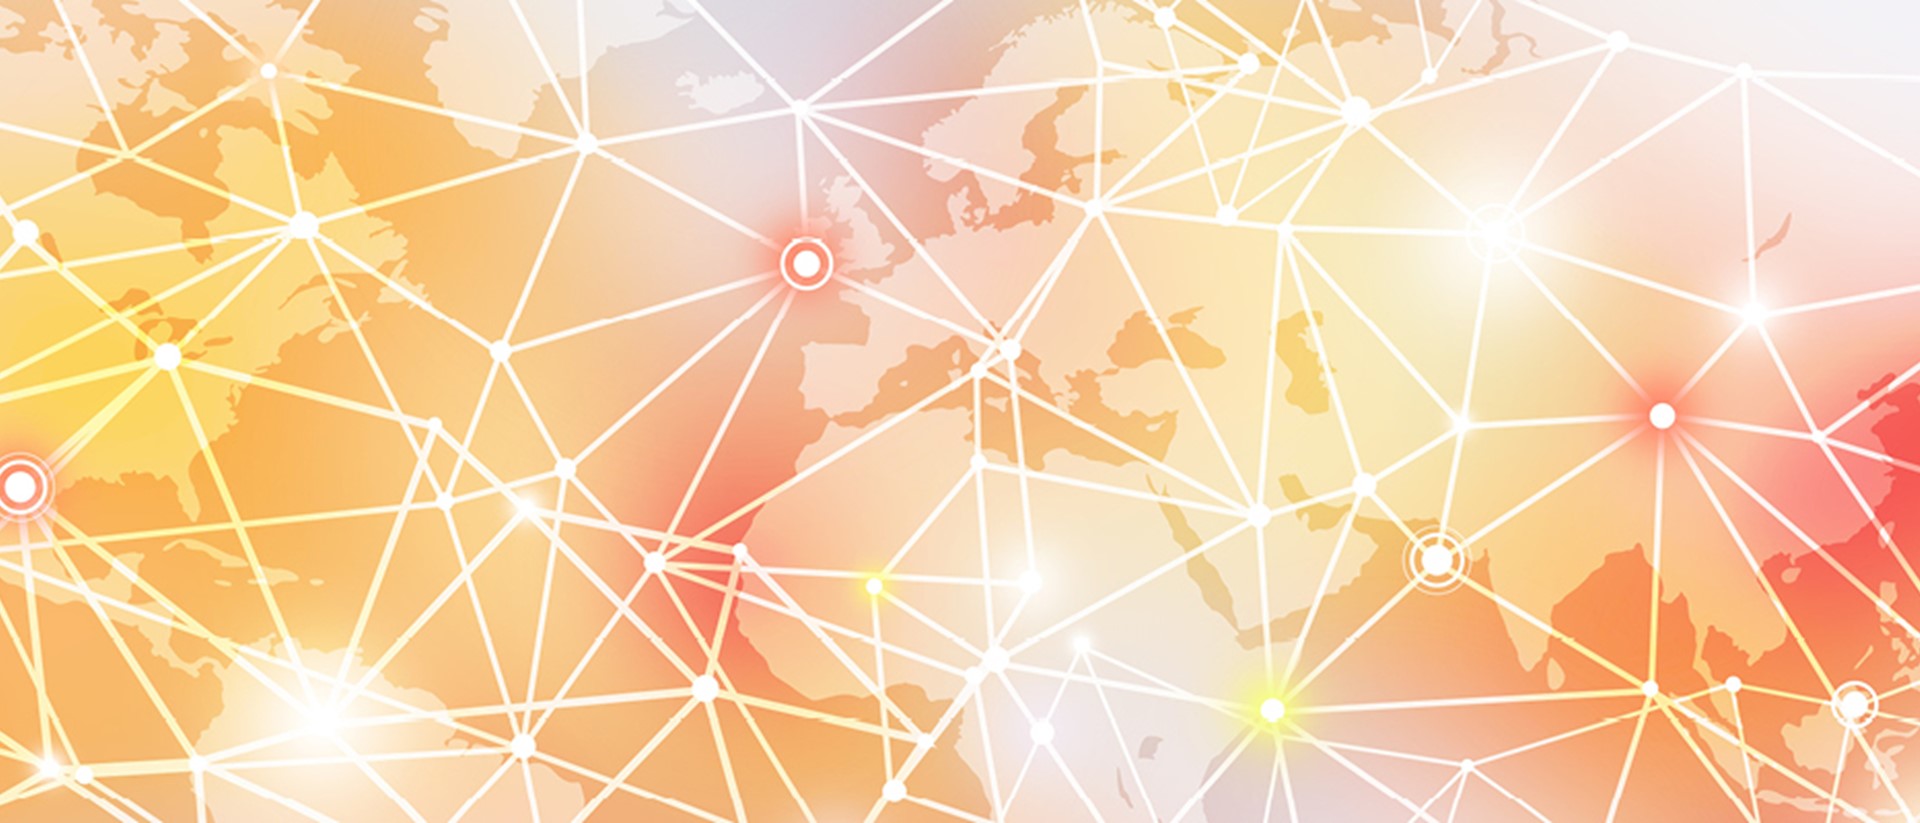 Image of a world map with lines across it with an orange background